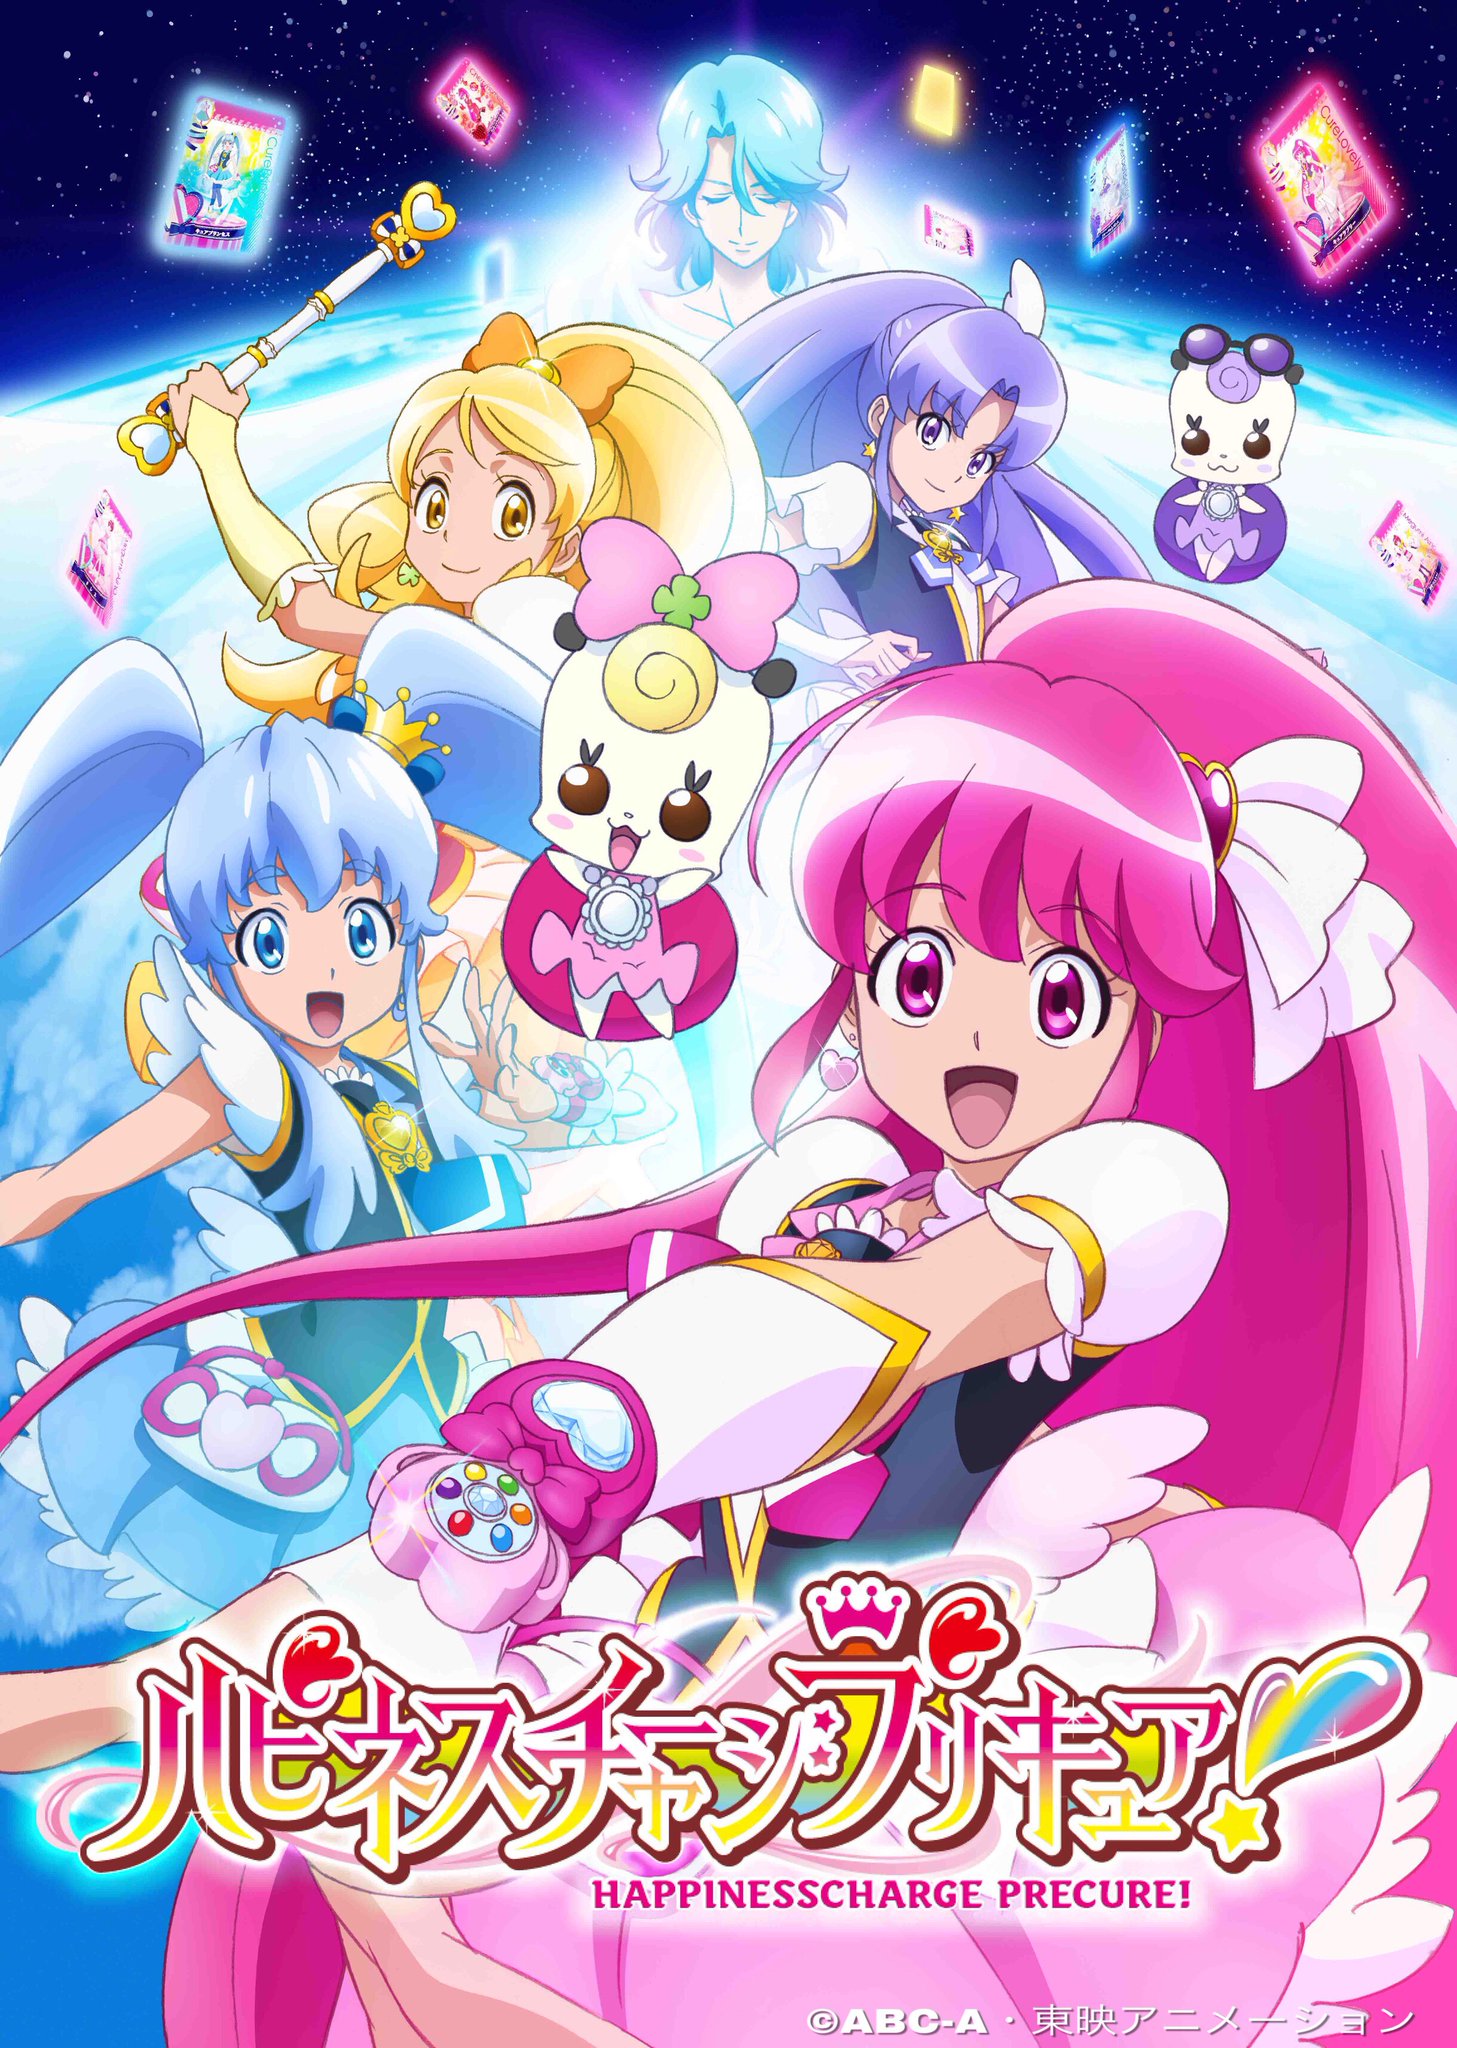 Precure Franchise to Hold Its First Virtual Music Event in December -  Crunchyroll News